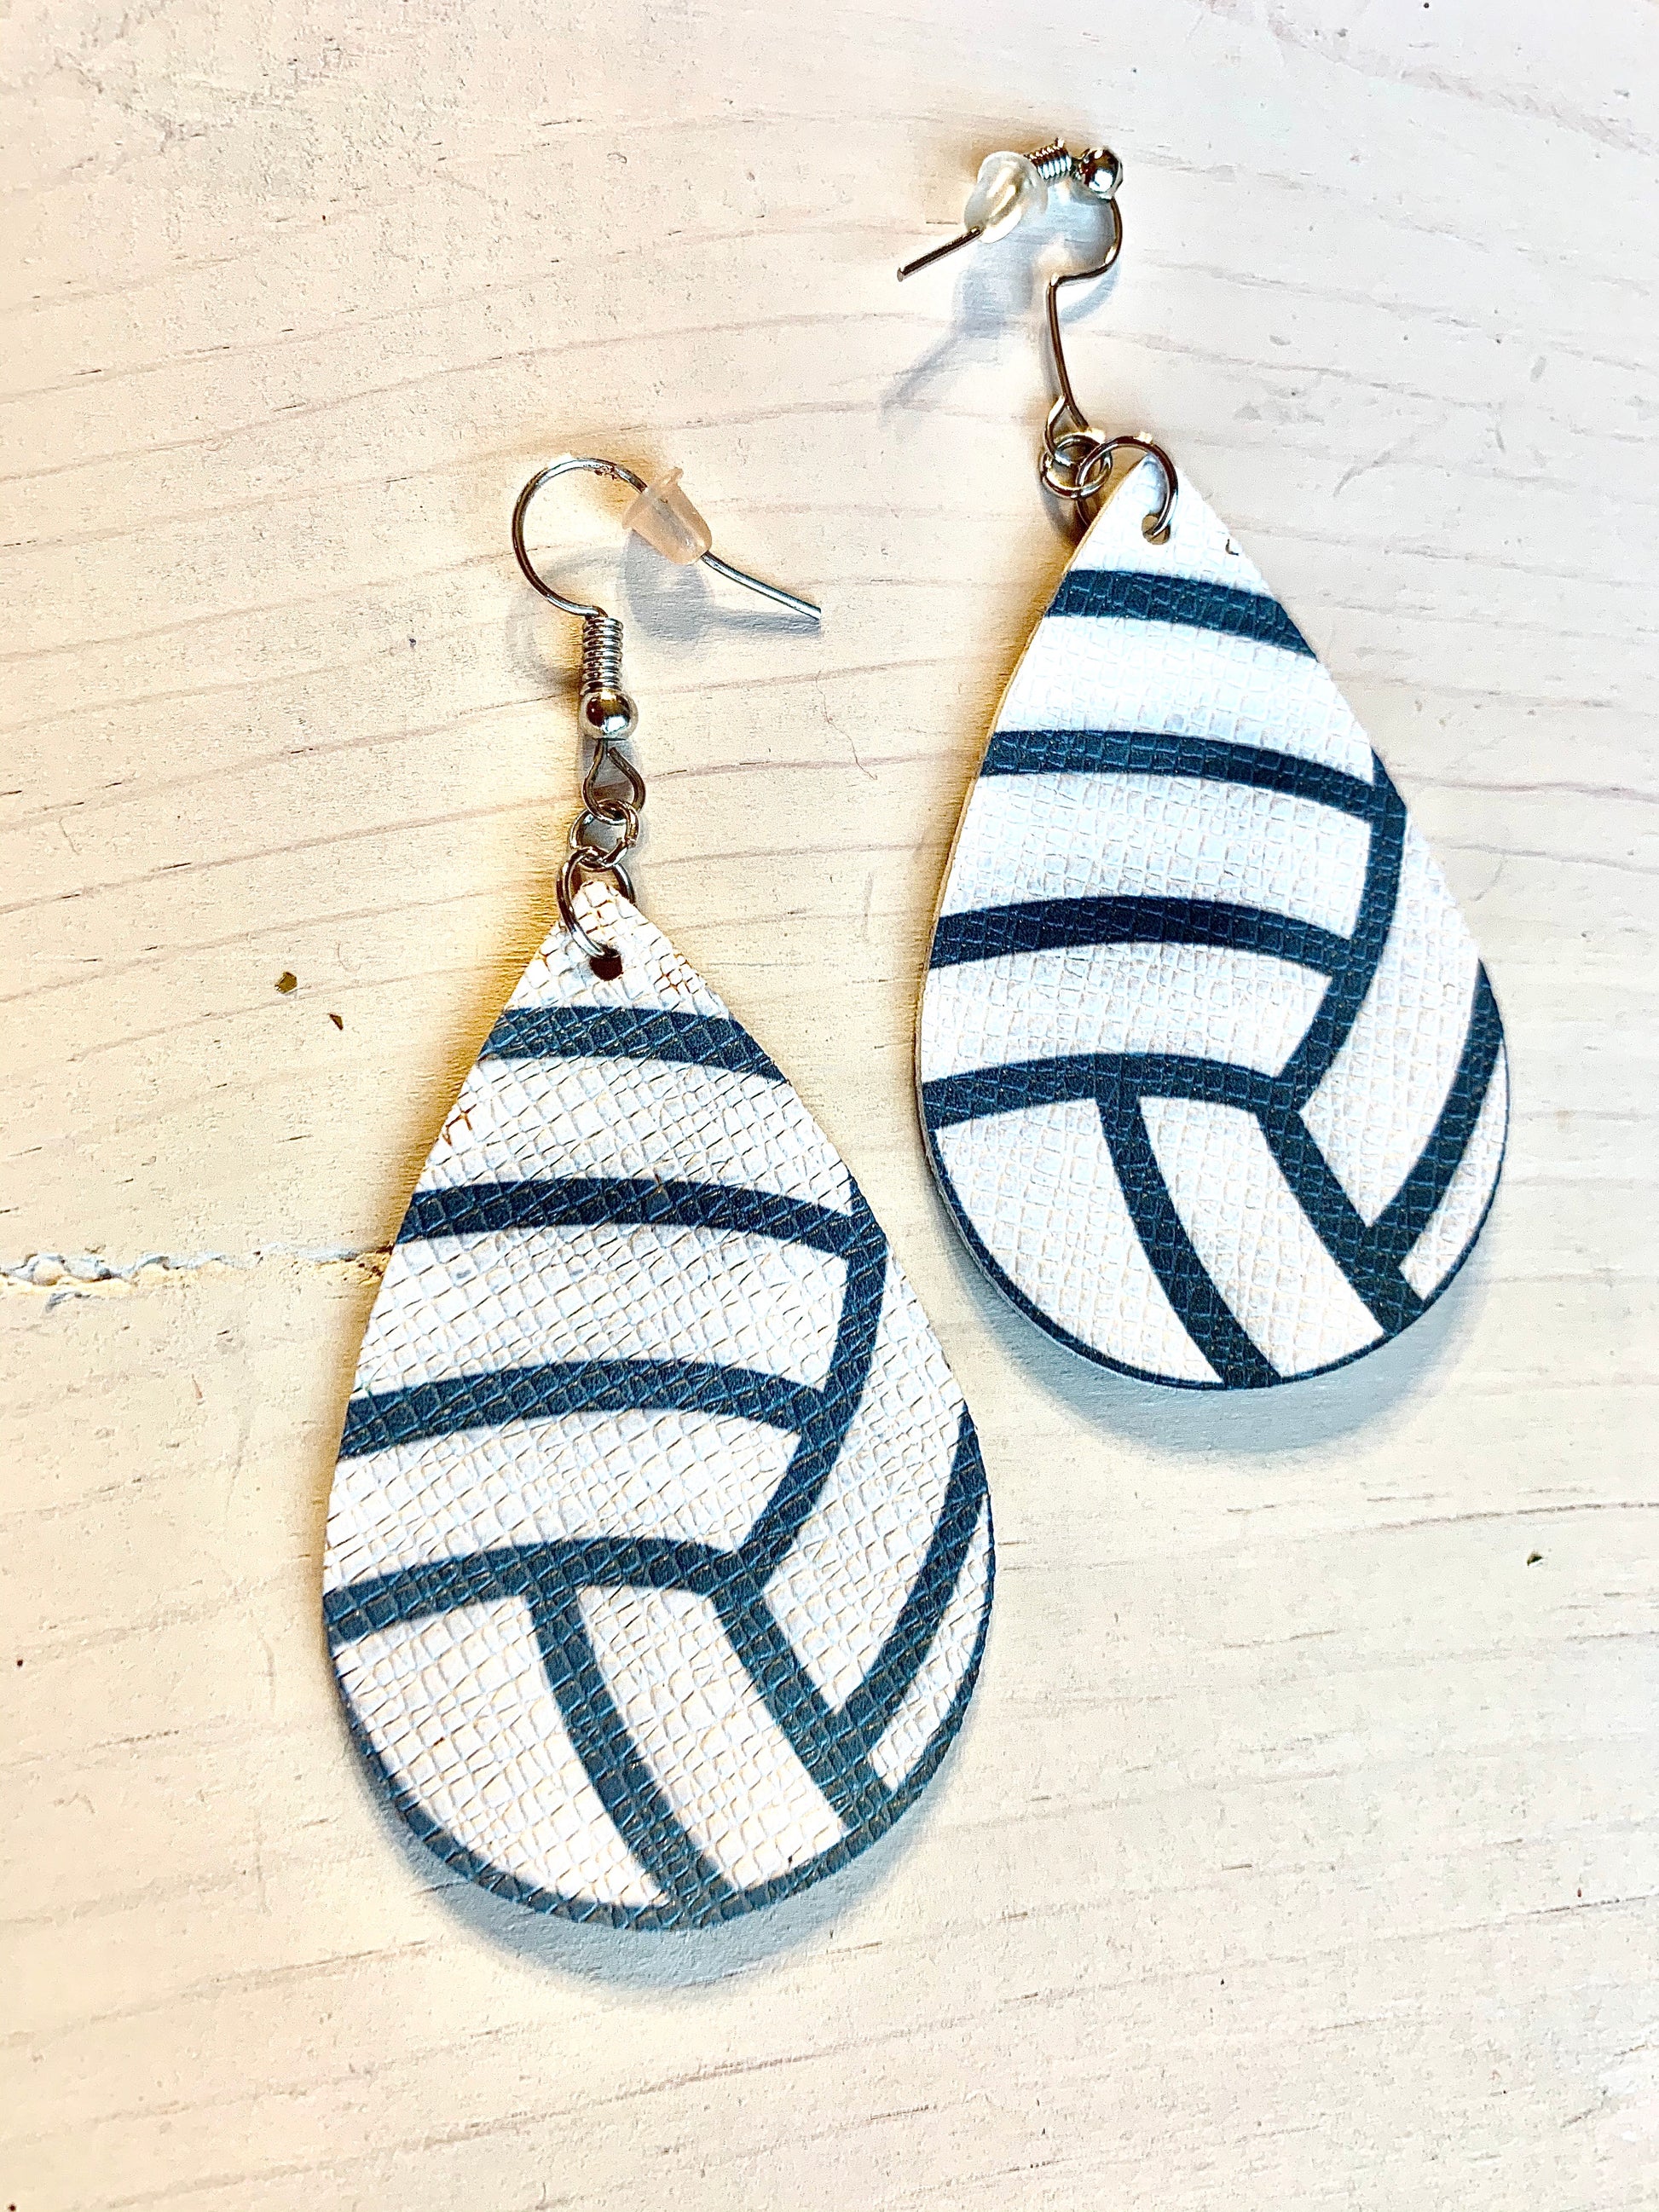 Earrings { Leather } Football. Buffalo plaid. Glitter. Basketball. Baseball. Volleyball. Paisley. Floral. Leopard. Rainbow. Giraffe. $5 jewelry! - Stacy's Pink Martini Boutique